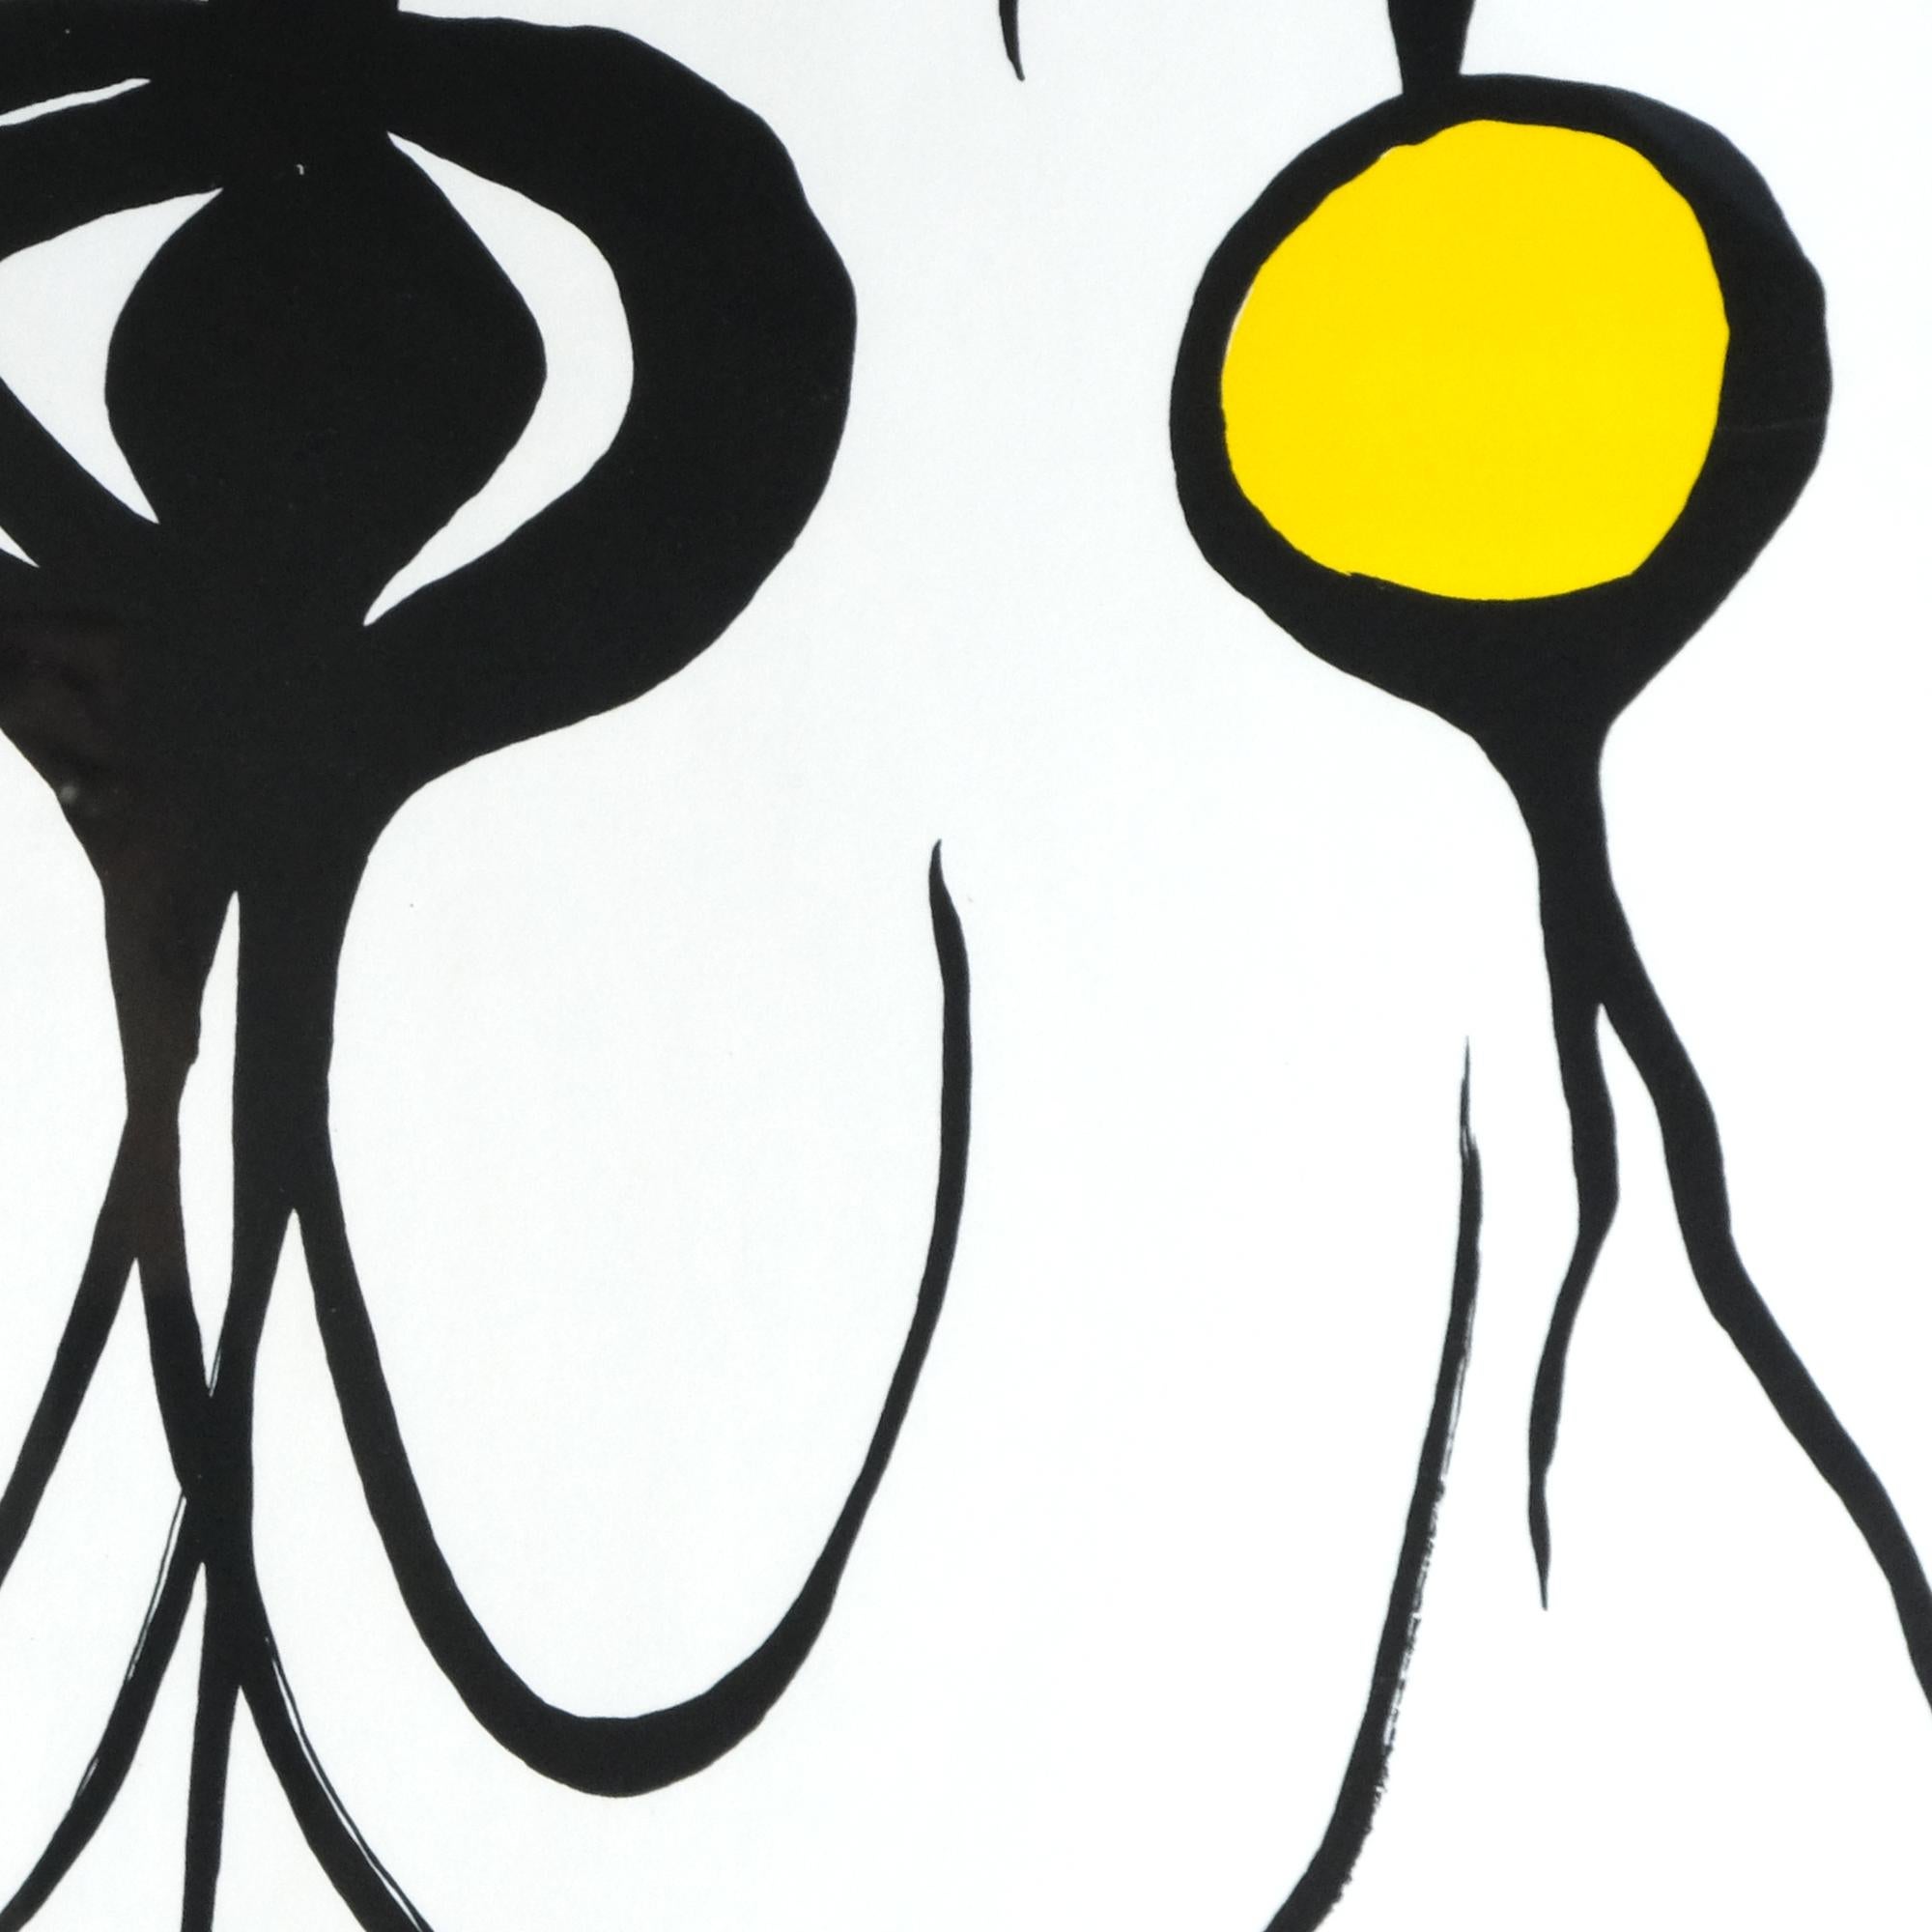 French Alexander Calder - Three Onions - Signed Artist's proof on vellum, 1965. For Sale